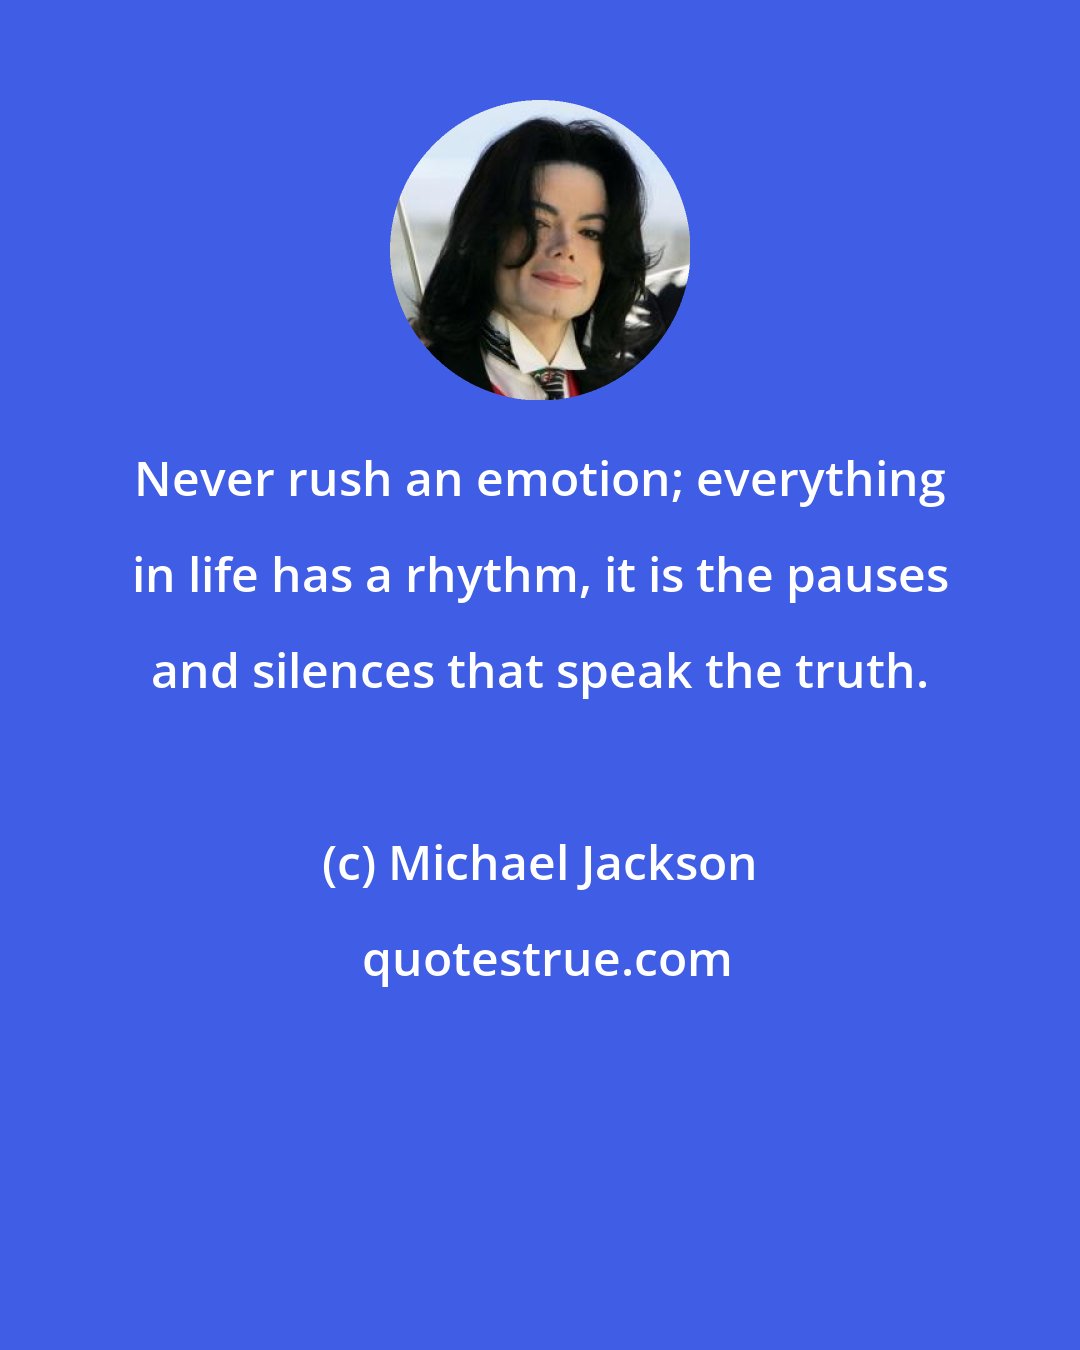 Michael Jackson: Never rush an emotion; everything in life has a rhythm, it is the pauses and silences that speak the truth.